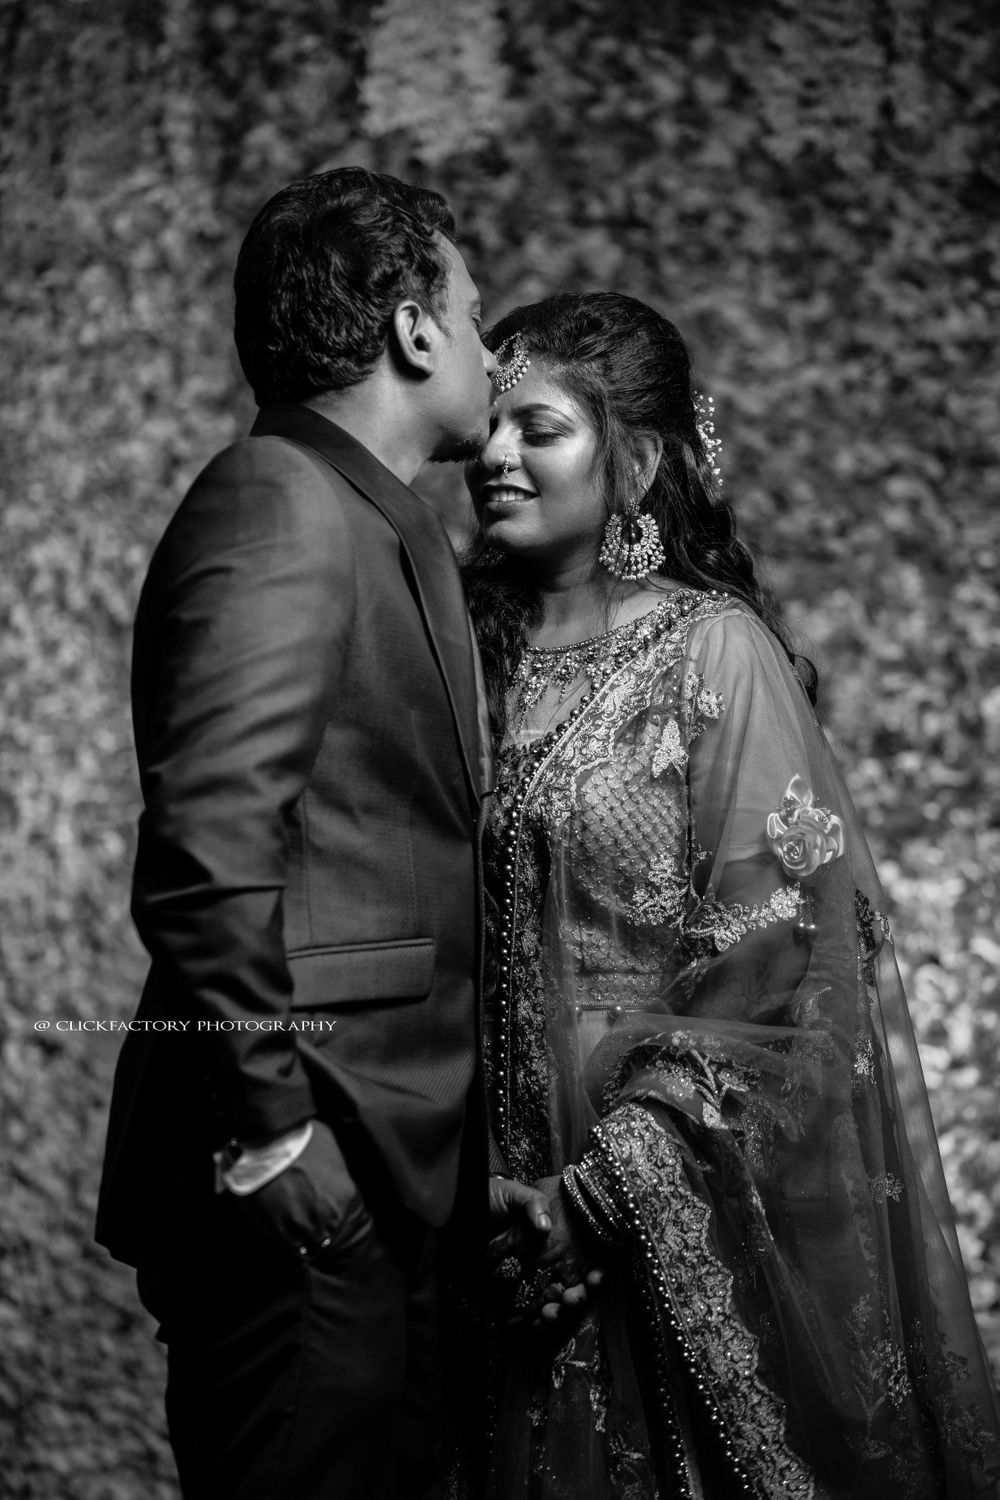 Photo From PREM & CHANDINI - By Click factory photography